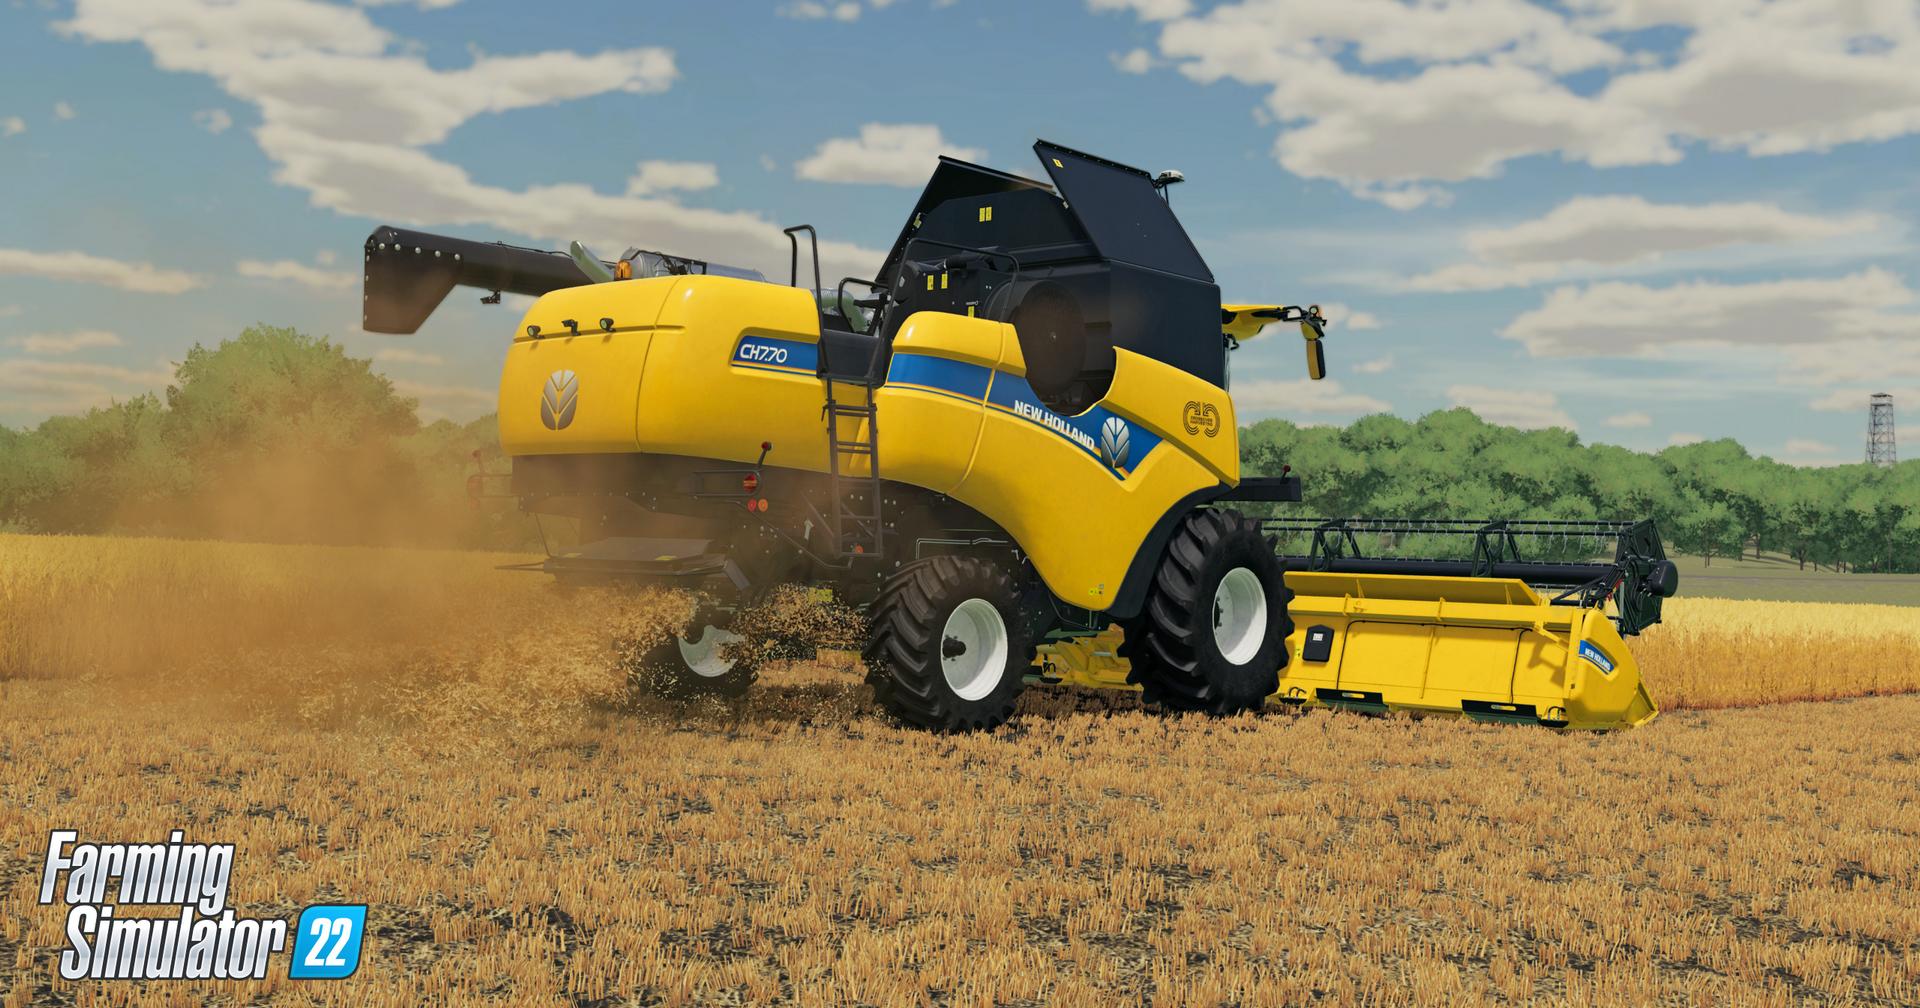 Bring Farming Simulator 22 To The Fullest With Powerful Mods 0231